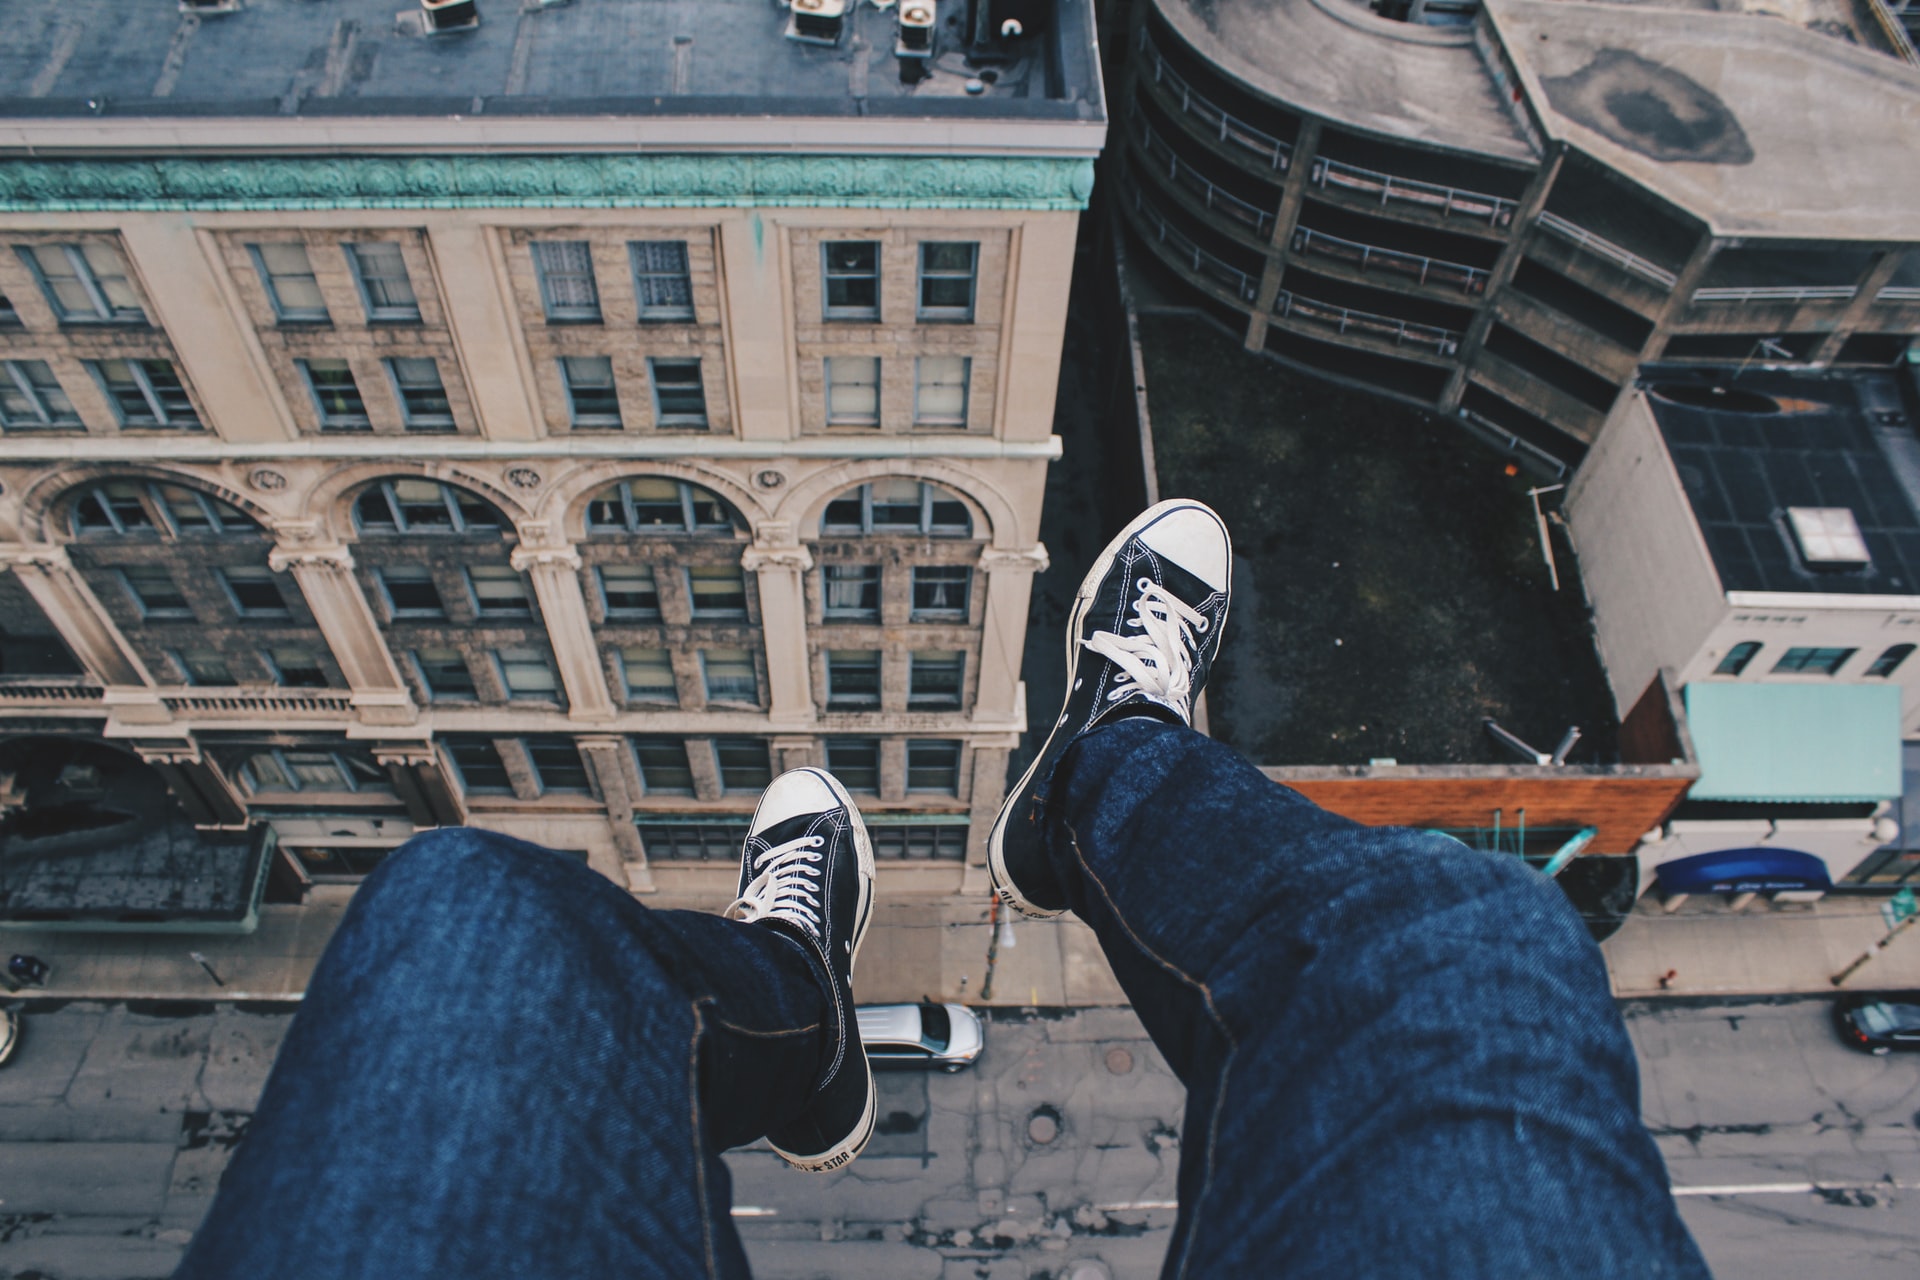 Feet dangling from a building